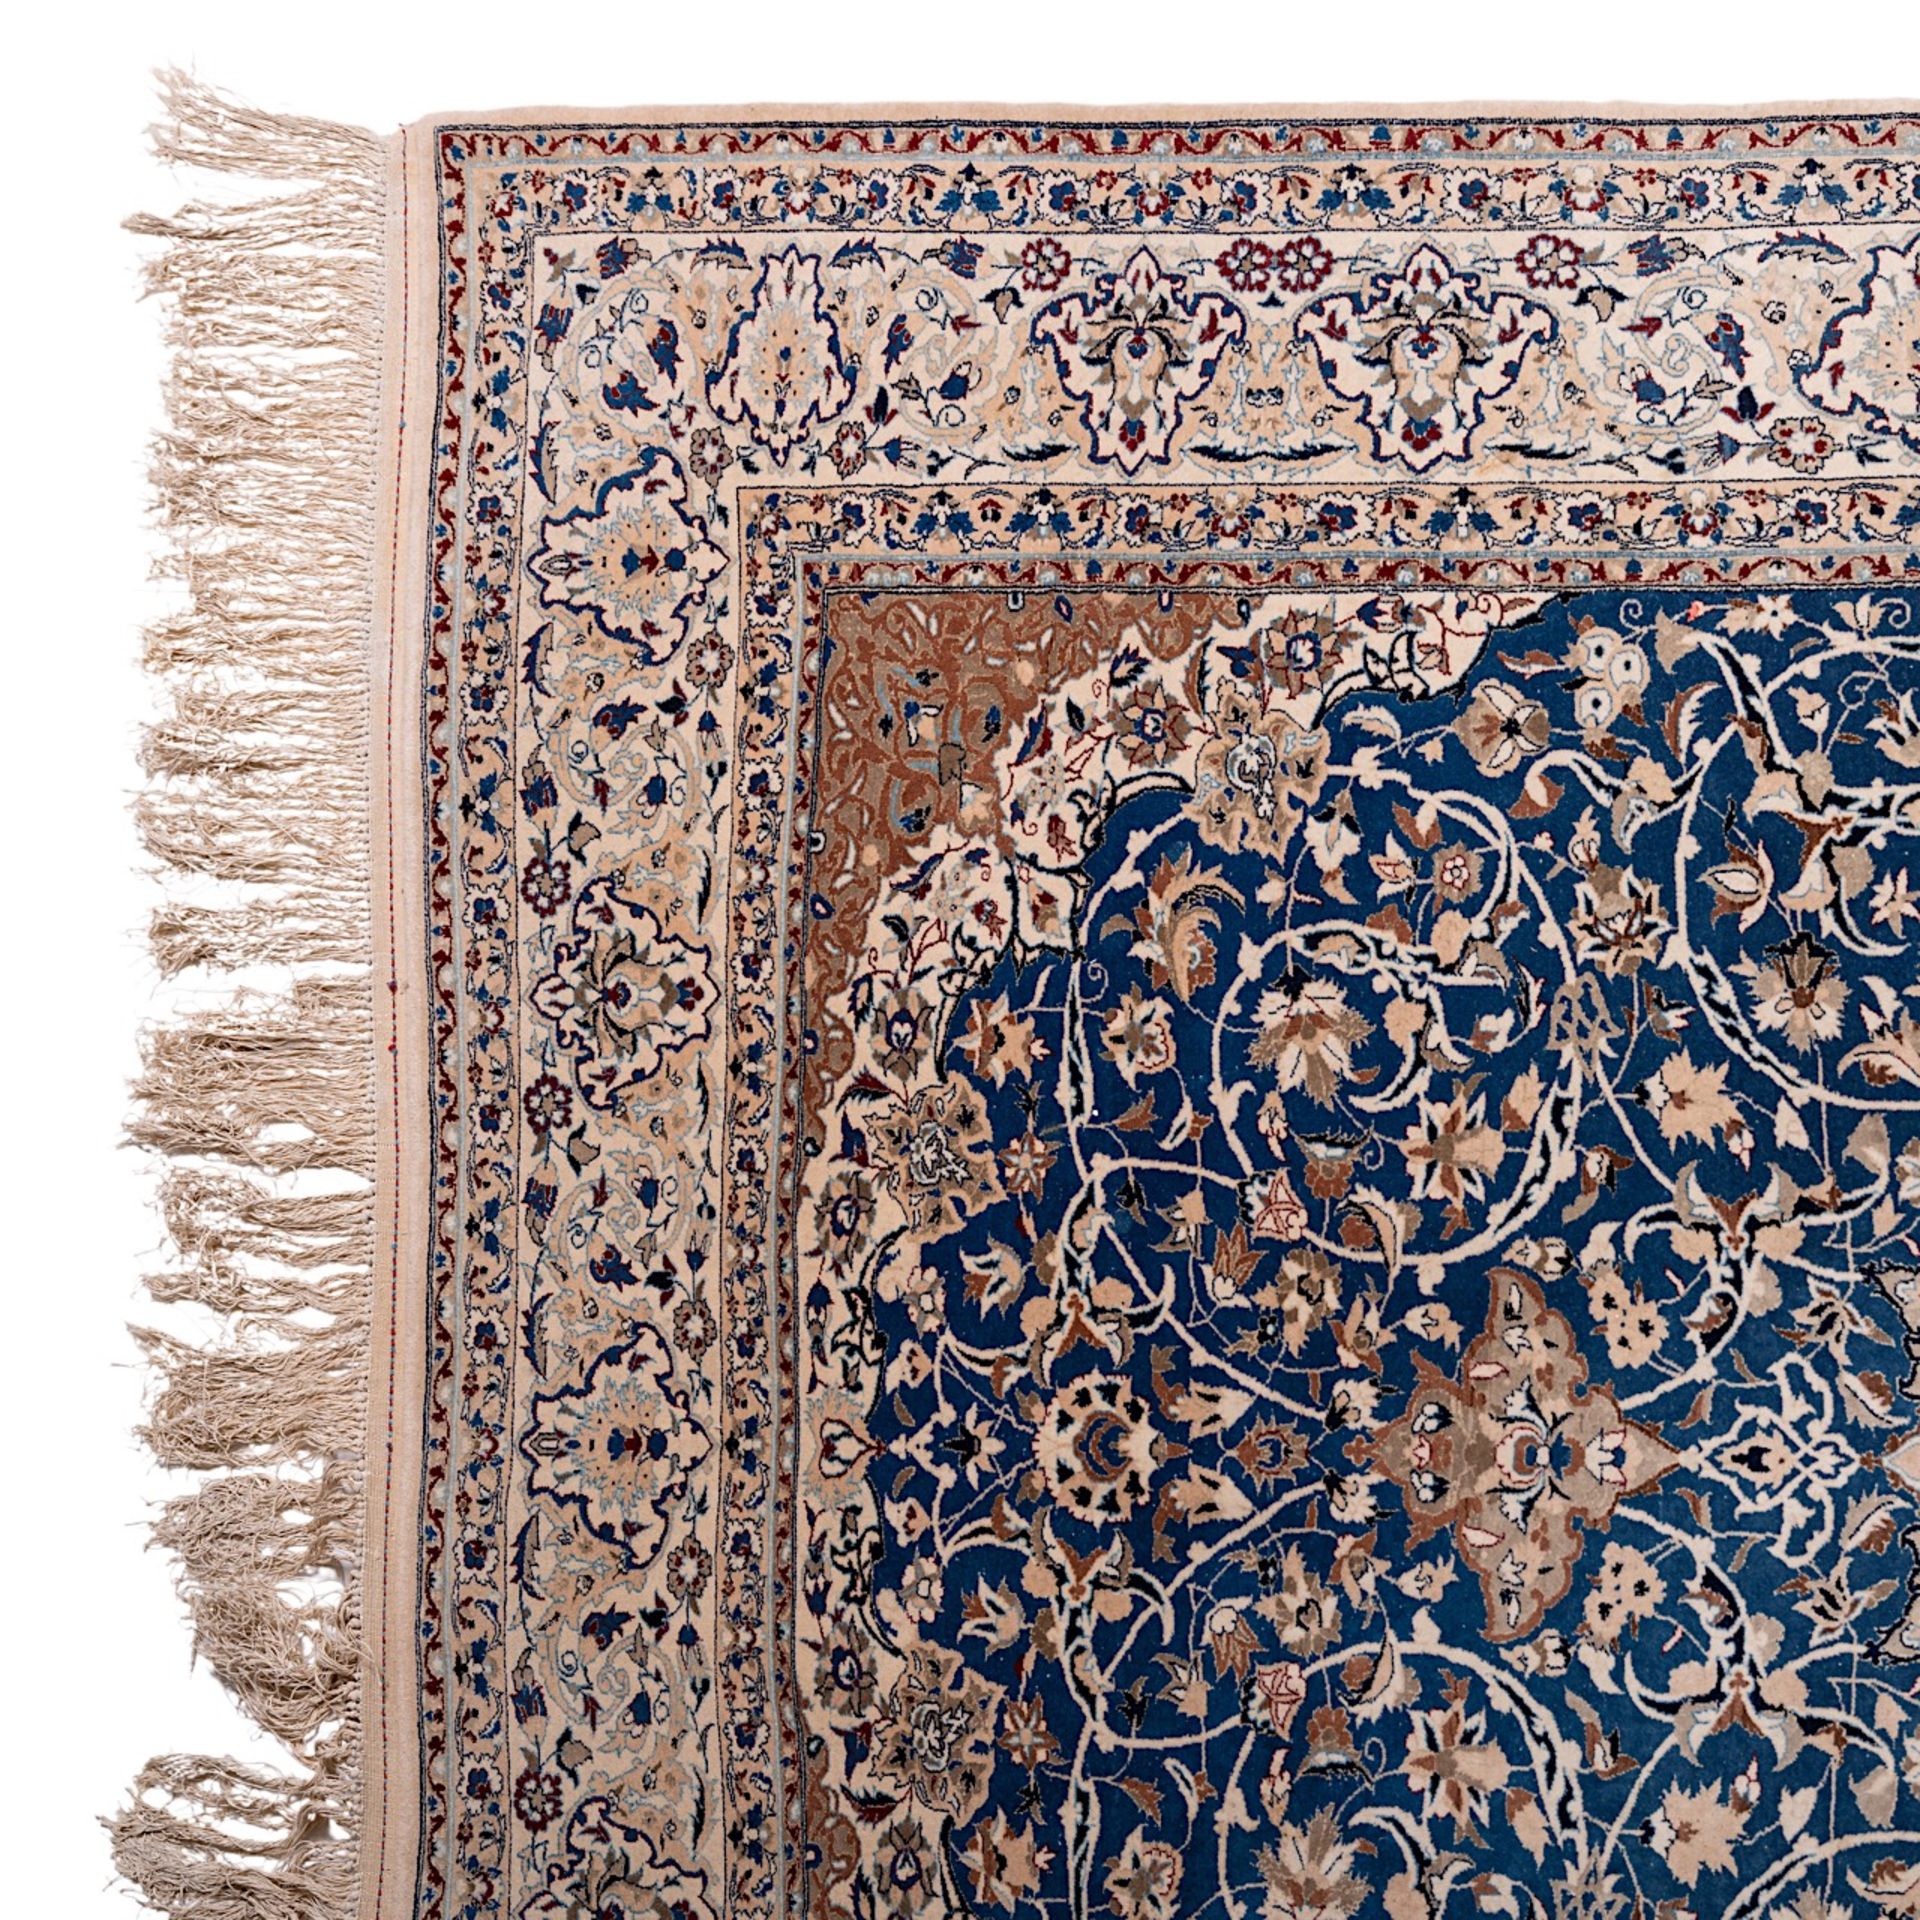 A Persian Nain woollen rug with a central medallion, 229 x 169 cm - Image 4 of 8